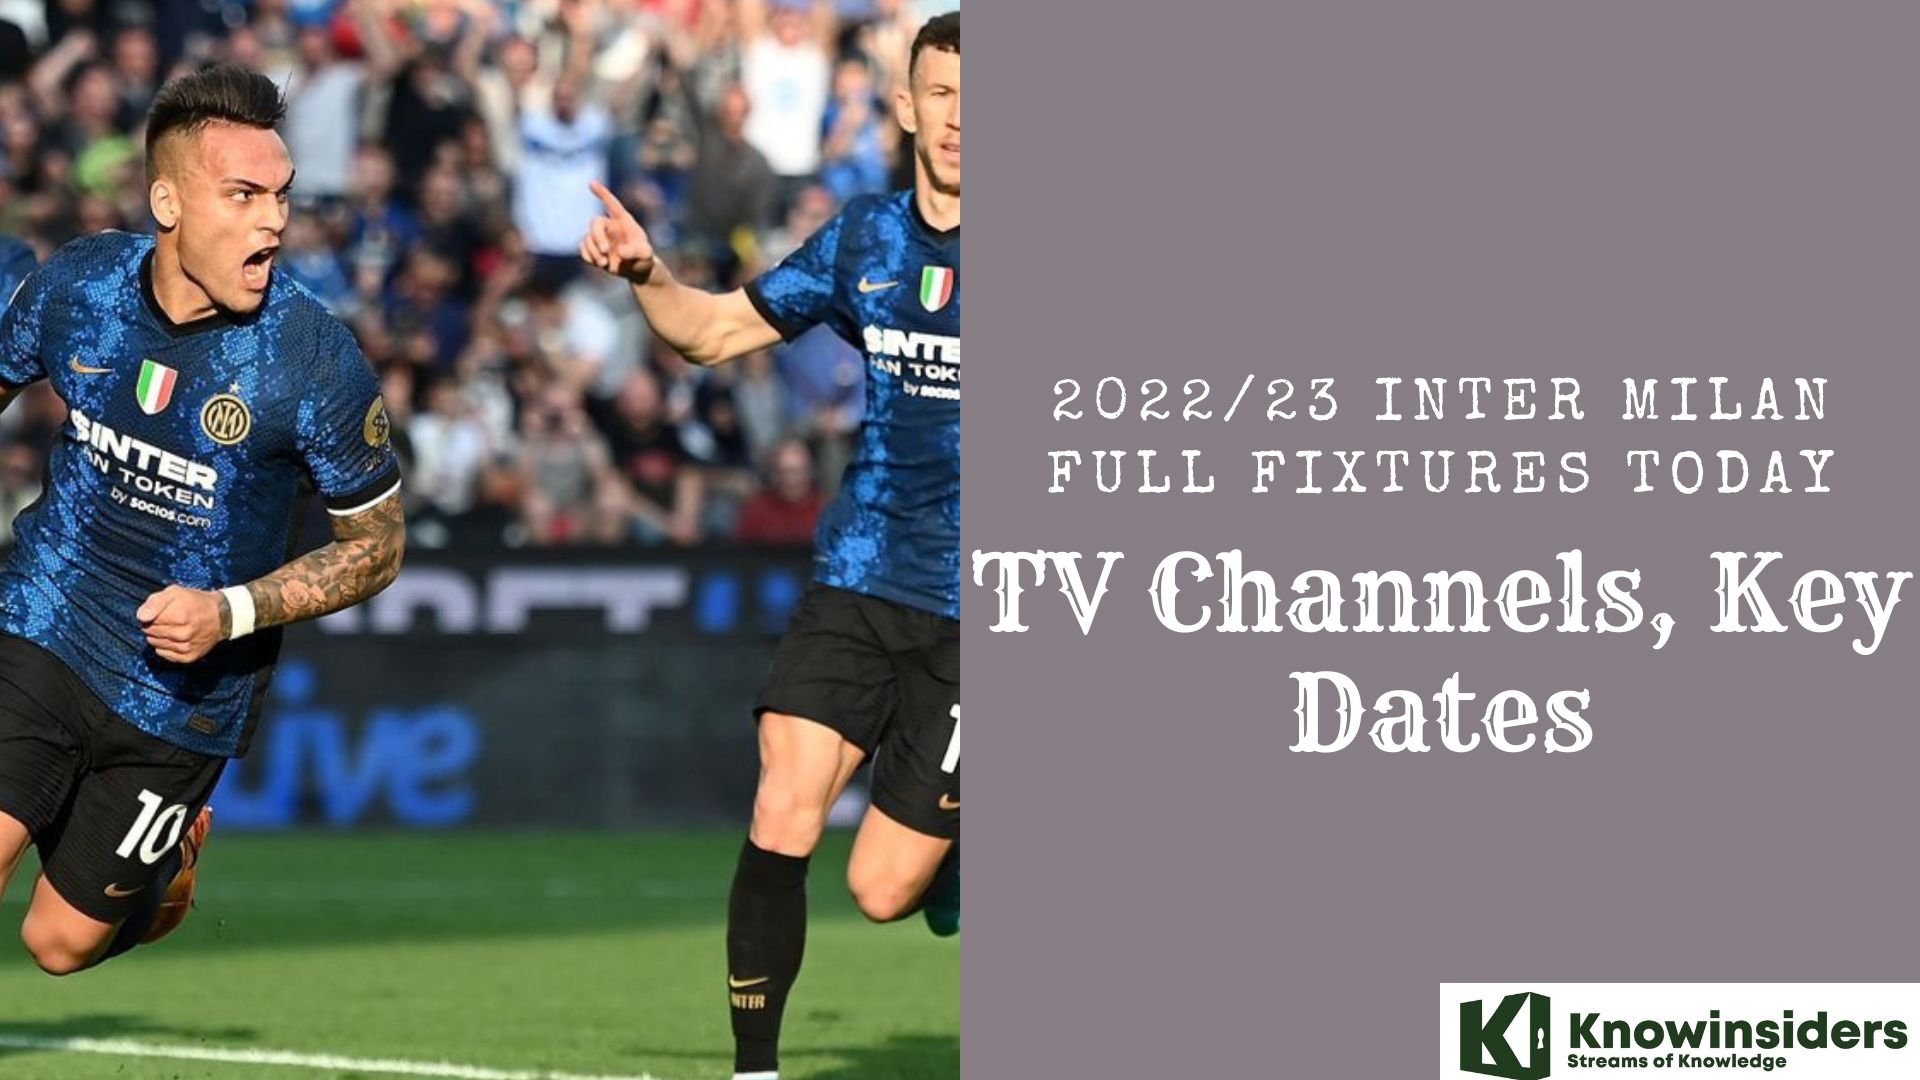 2022/23 Inter Milan Full Fixtures Today: TV Channels, Key Dates Knowinsiders.com 